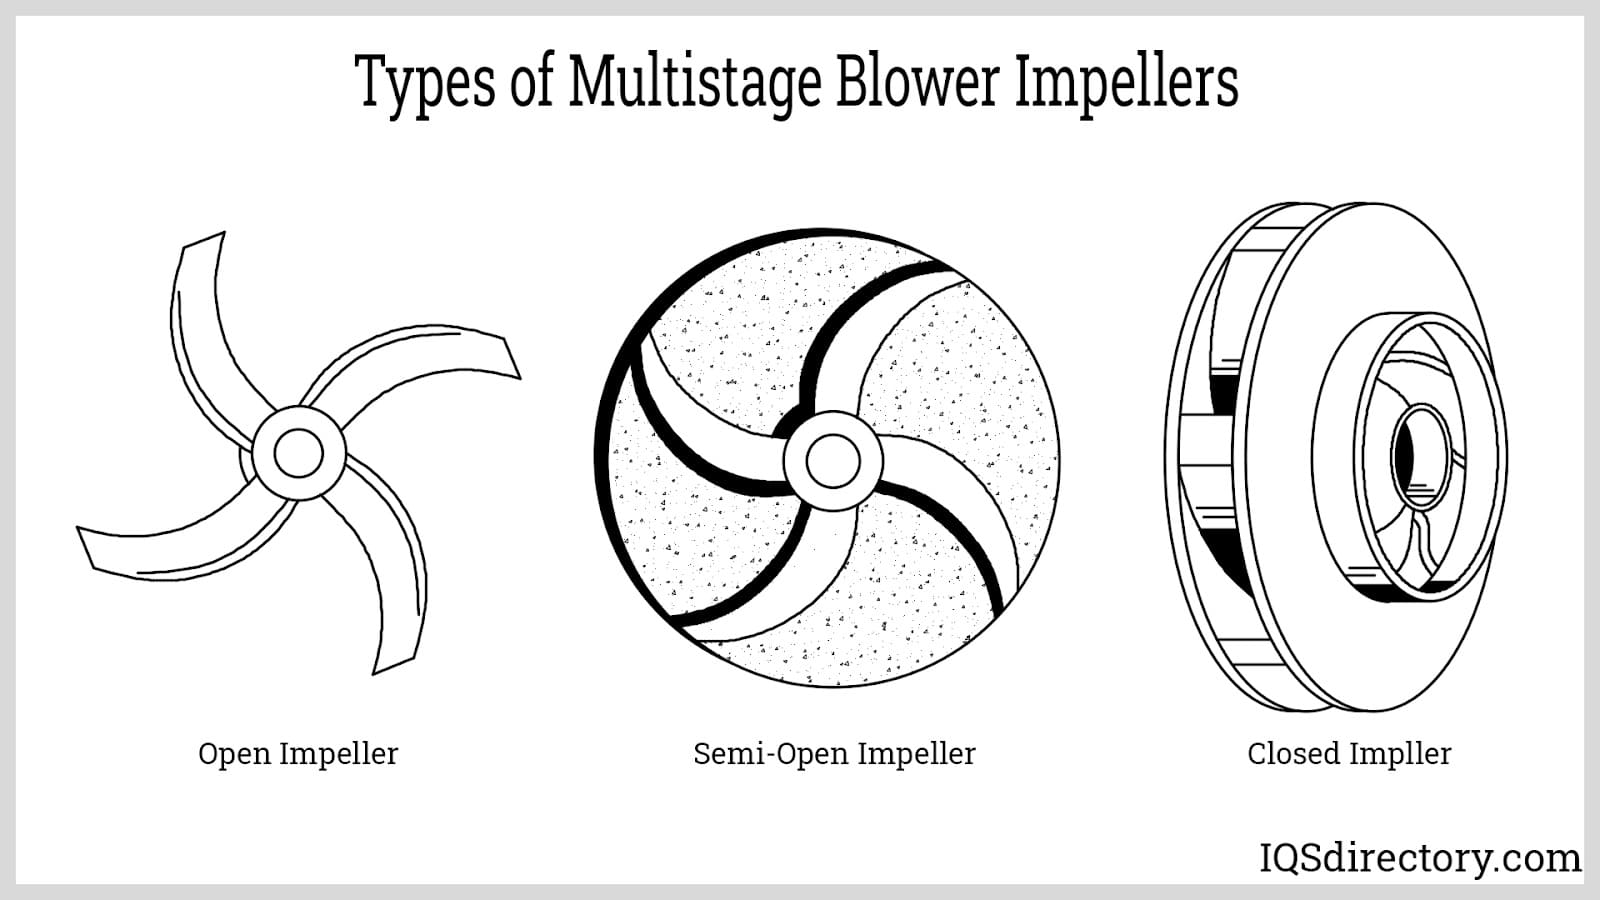 Types of Multistage Blower Impellers